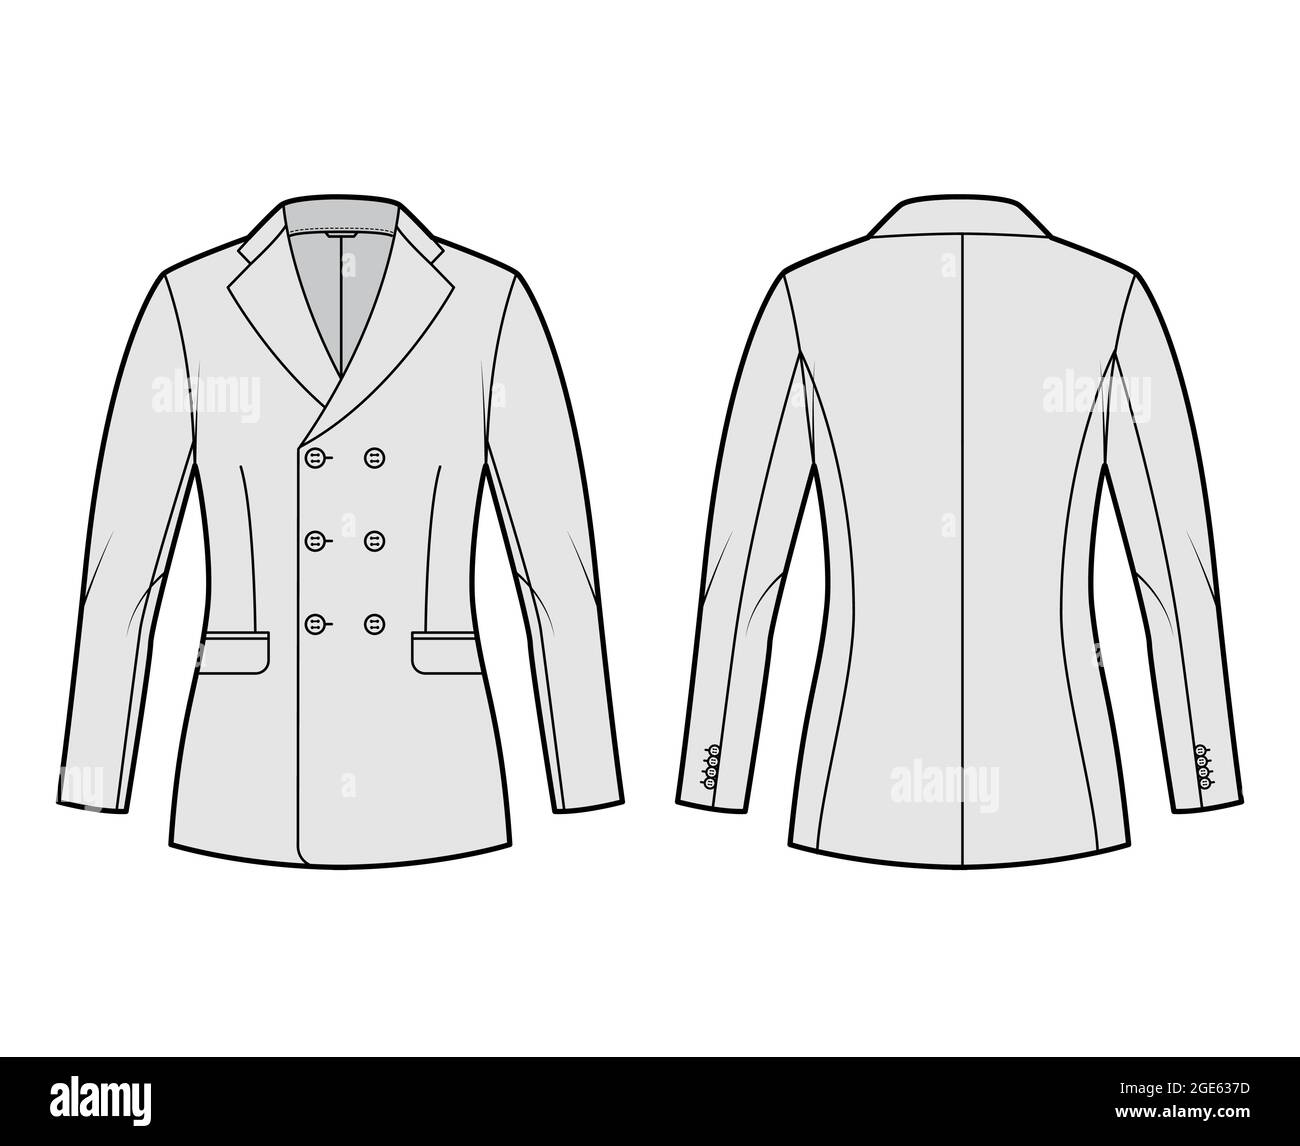 Fitted jacket suit technical fashion illustration with double breasted, notched lapel collar, flap pockets, hip length. Flat Blazer coat template front, back, grey color. Women, men unisex CAD mockup Stock Vector